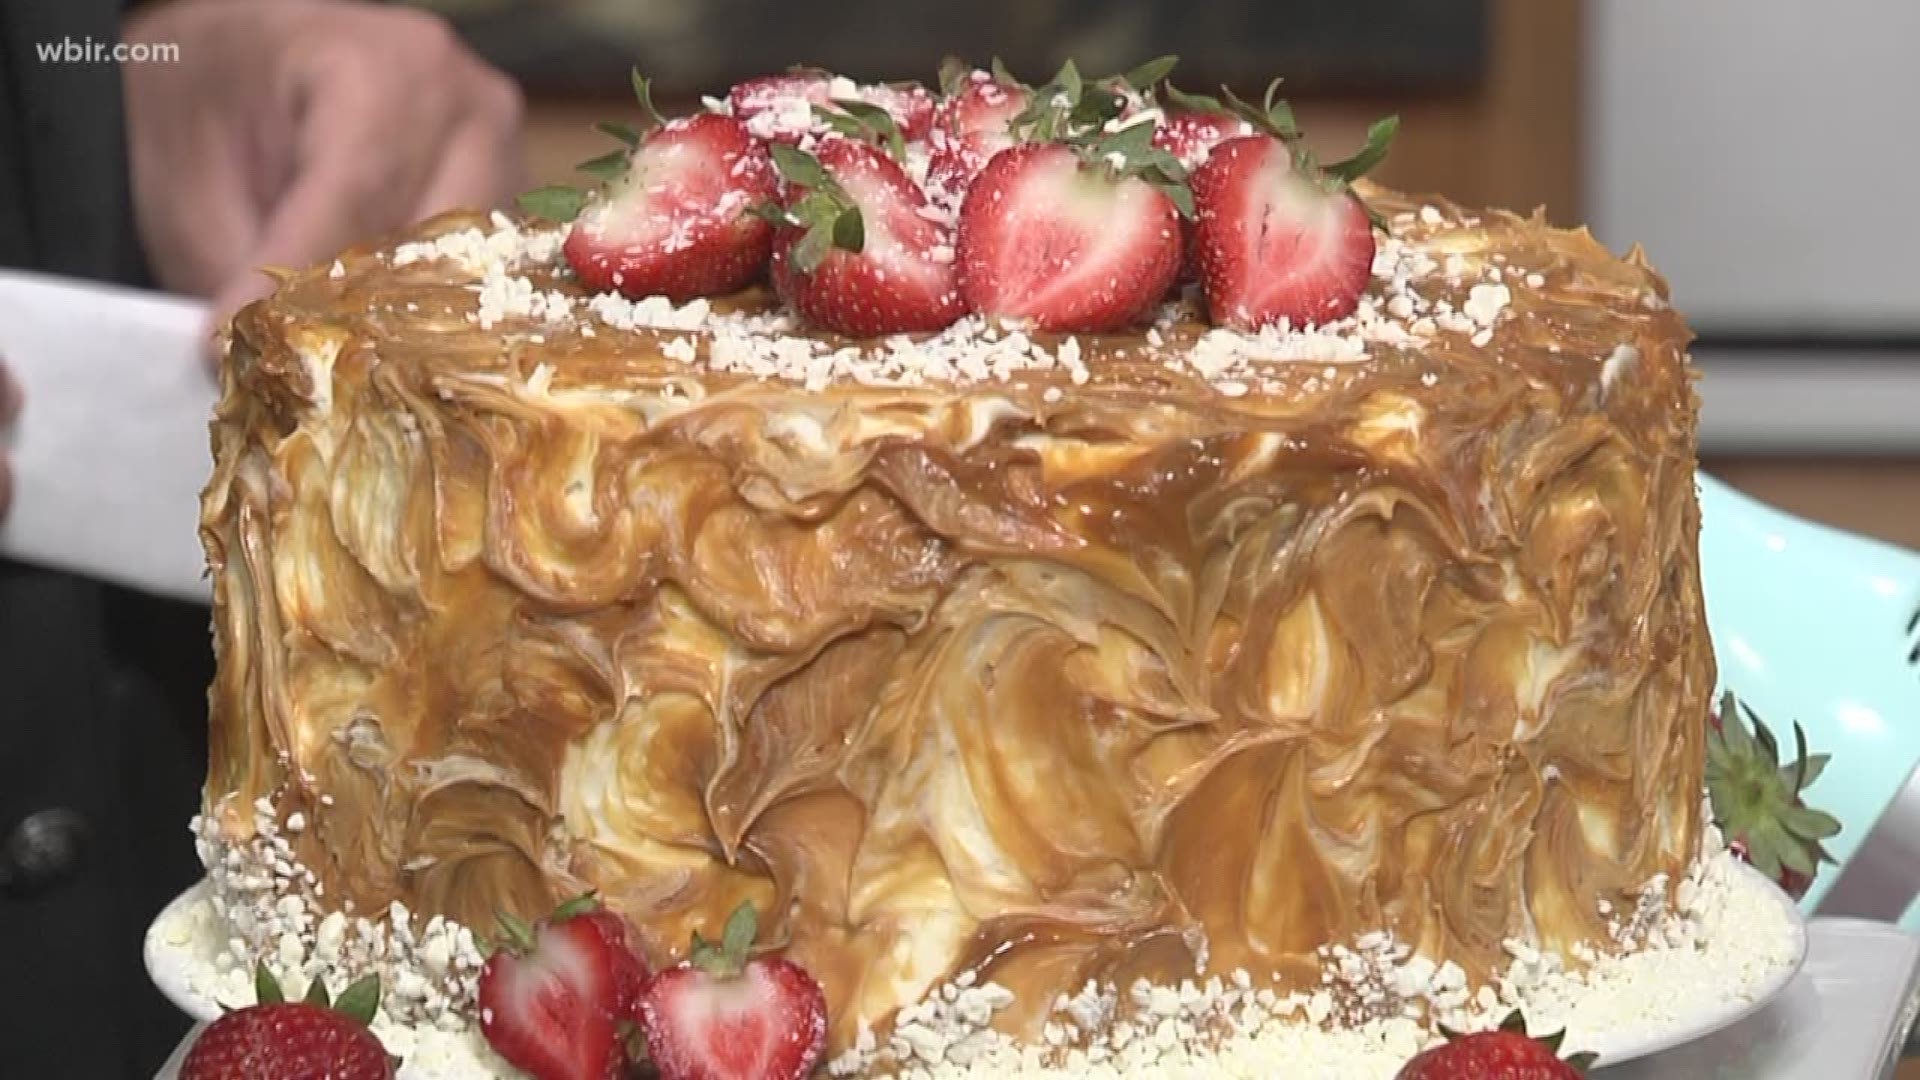 Deana Hurd with Lulu's Tea Room prepares Strawberry Dulce de Leche Cake or Strawberry & carmel cake. Lulu's Tea Room is located out in Powell. Visit lulustearoom.com to learn more. July 16, 2019-4pm.